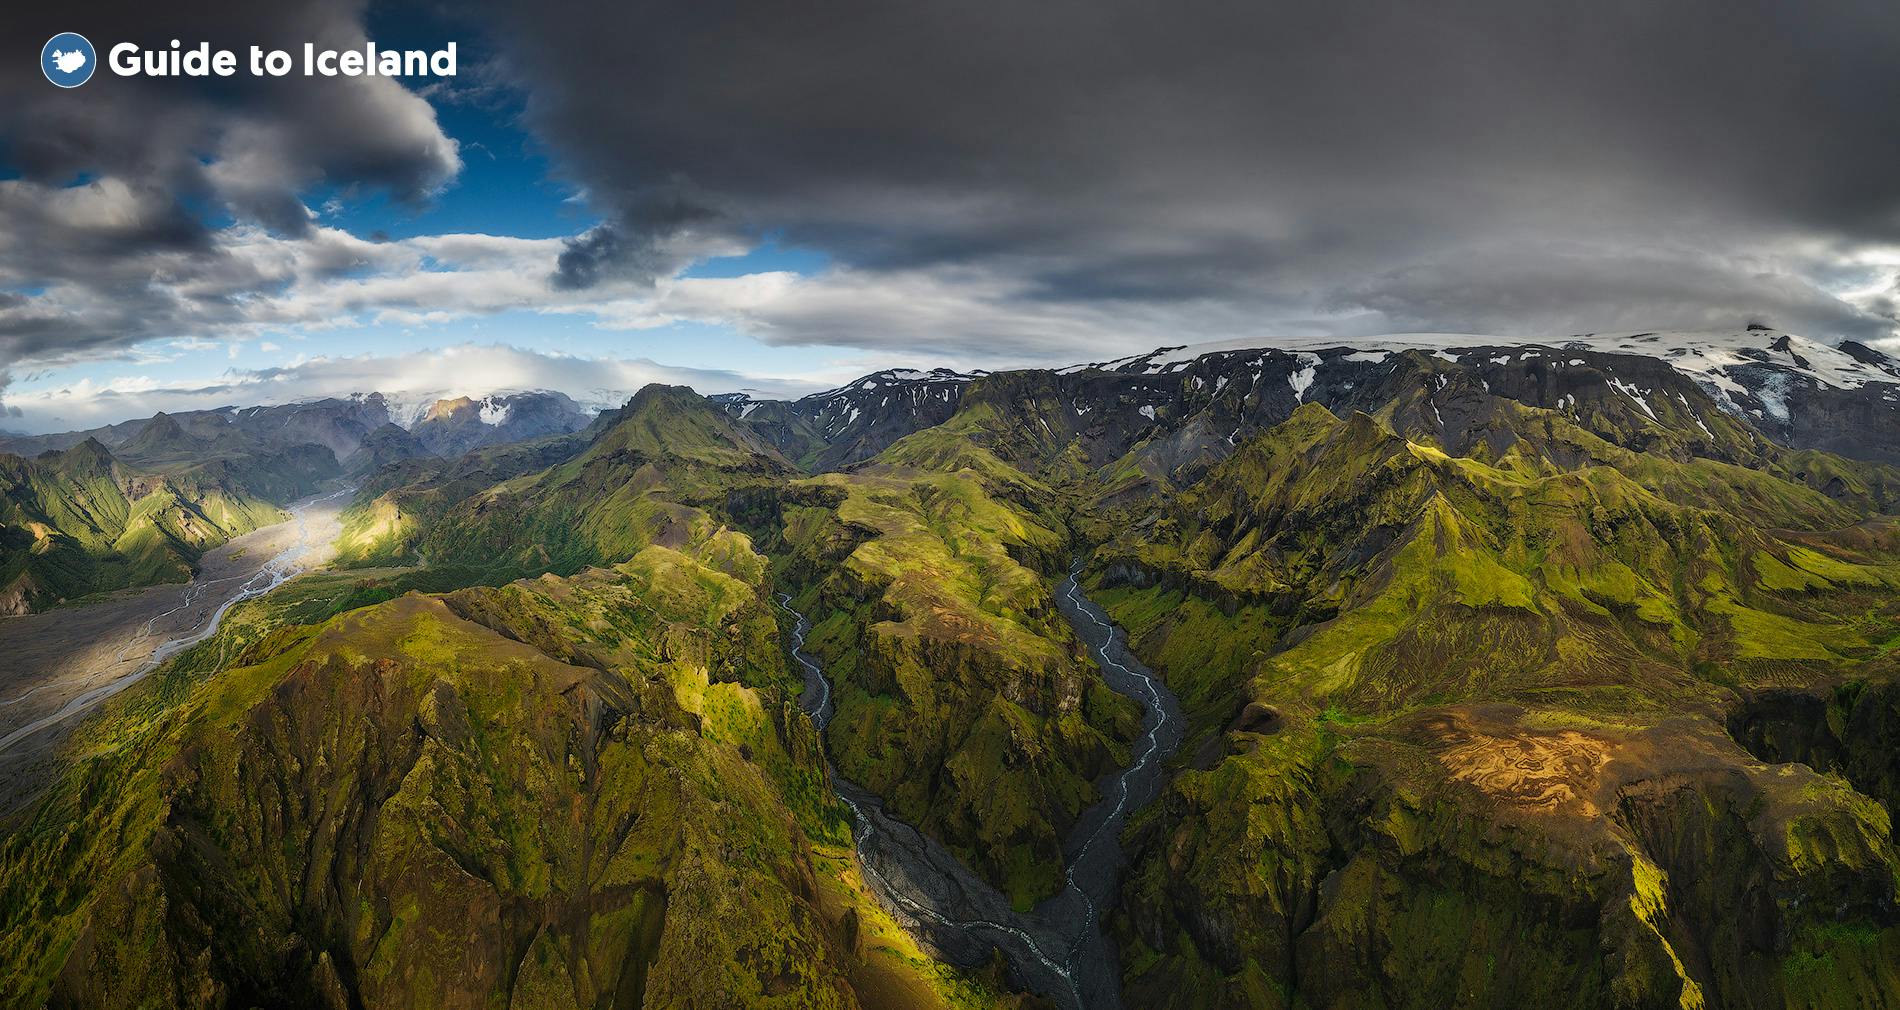 The green mountains of the Thorsmork valley in the Highlands of Iceland.